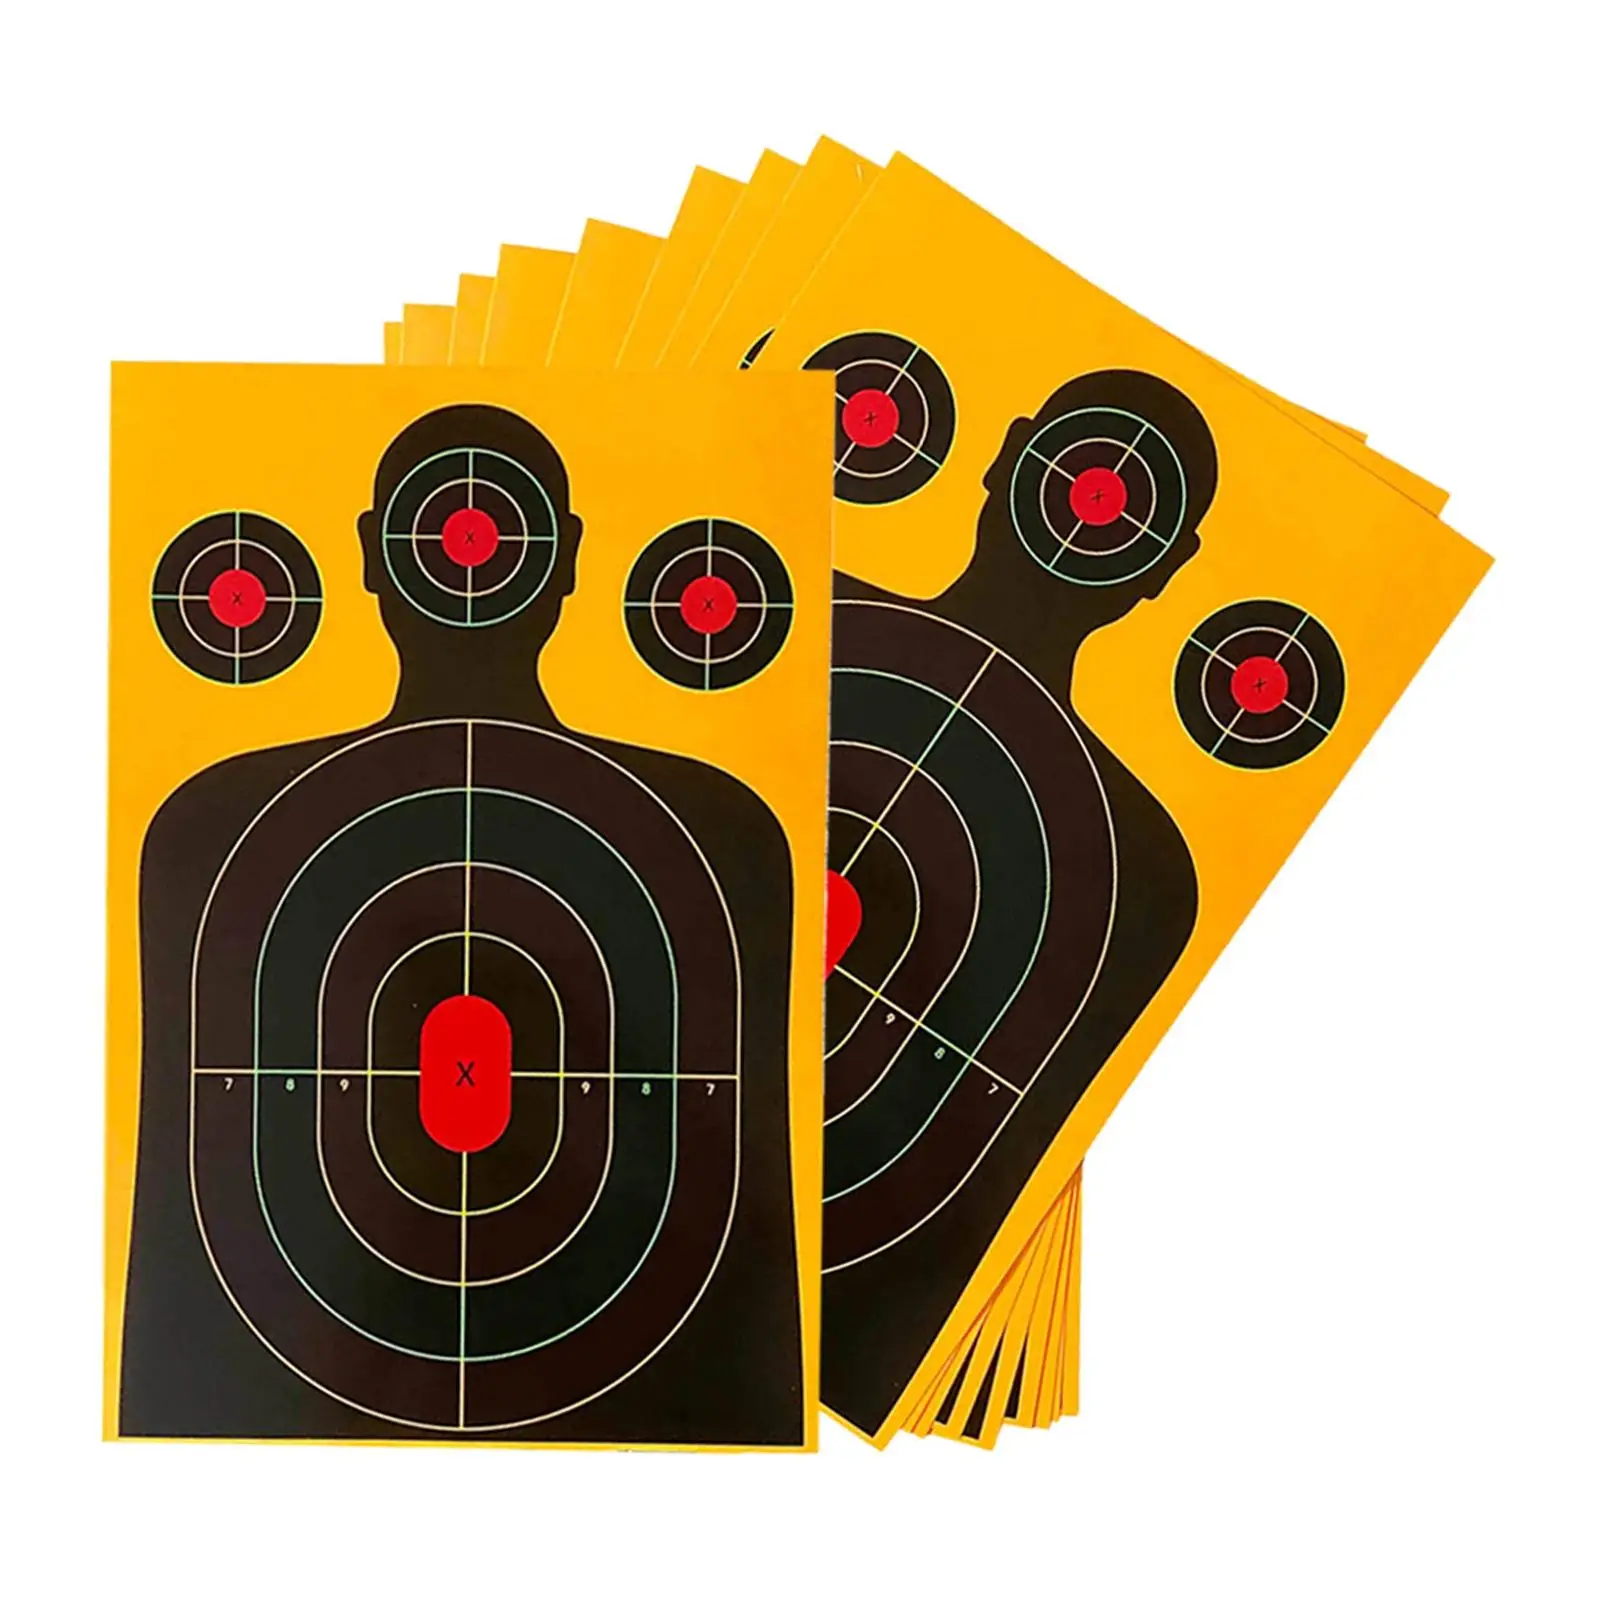 10x Silhouette Target Hunting Professional Outdoor Activities Sports Target